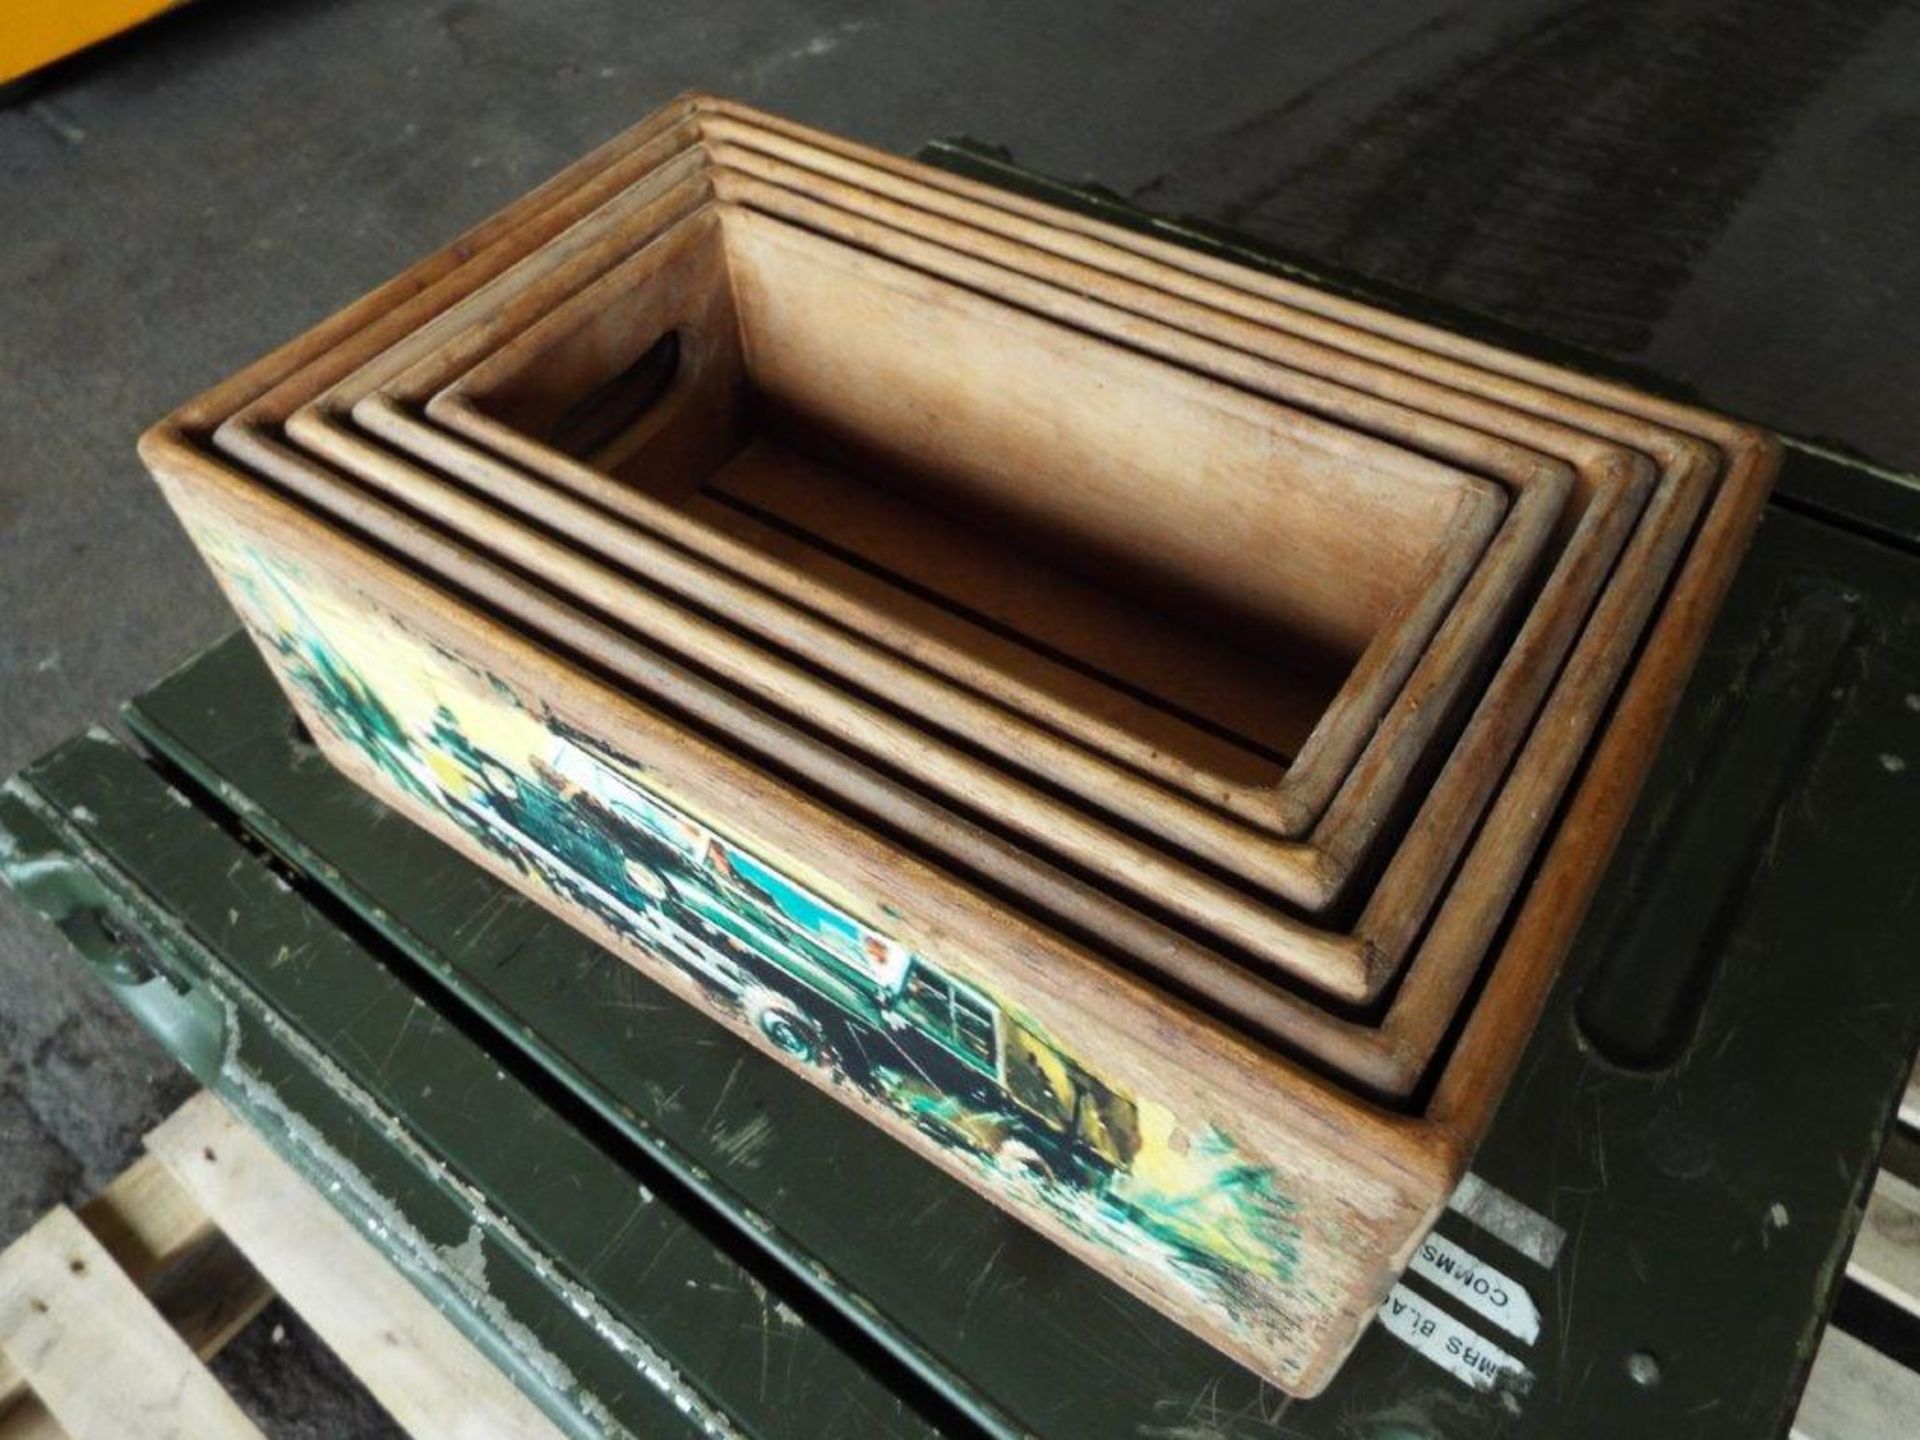 5 x Land Rover Wooden Display / Storage Boxes - Image 7 of 8